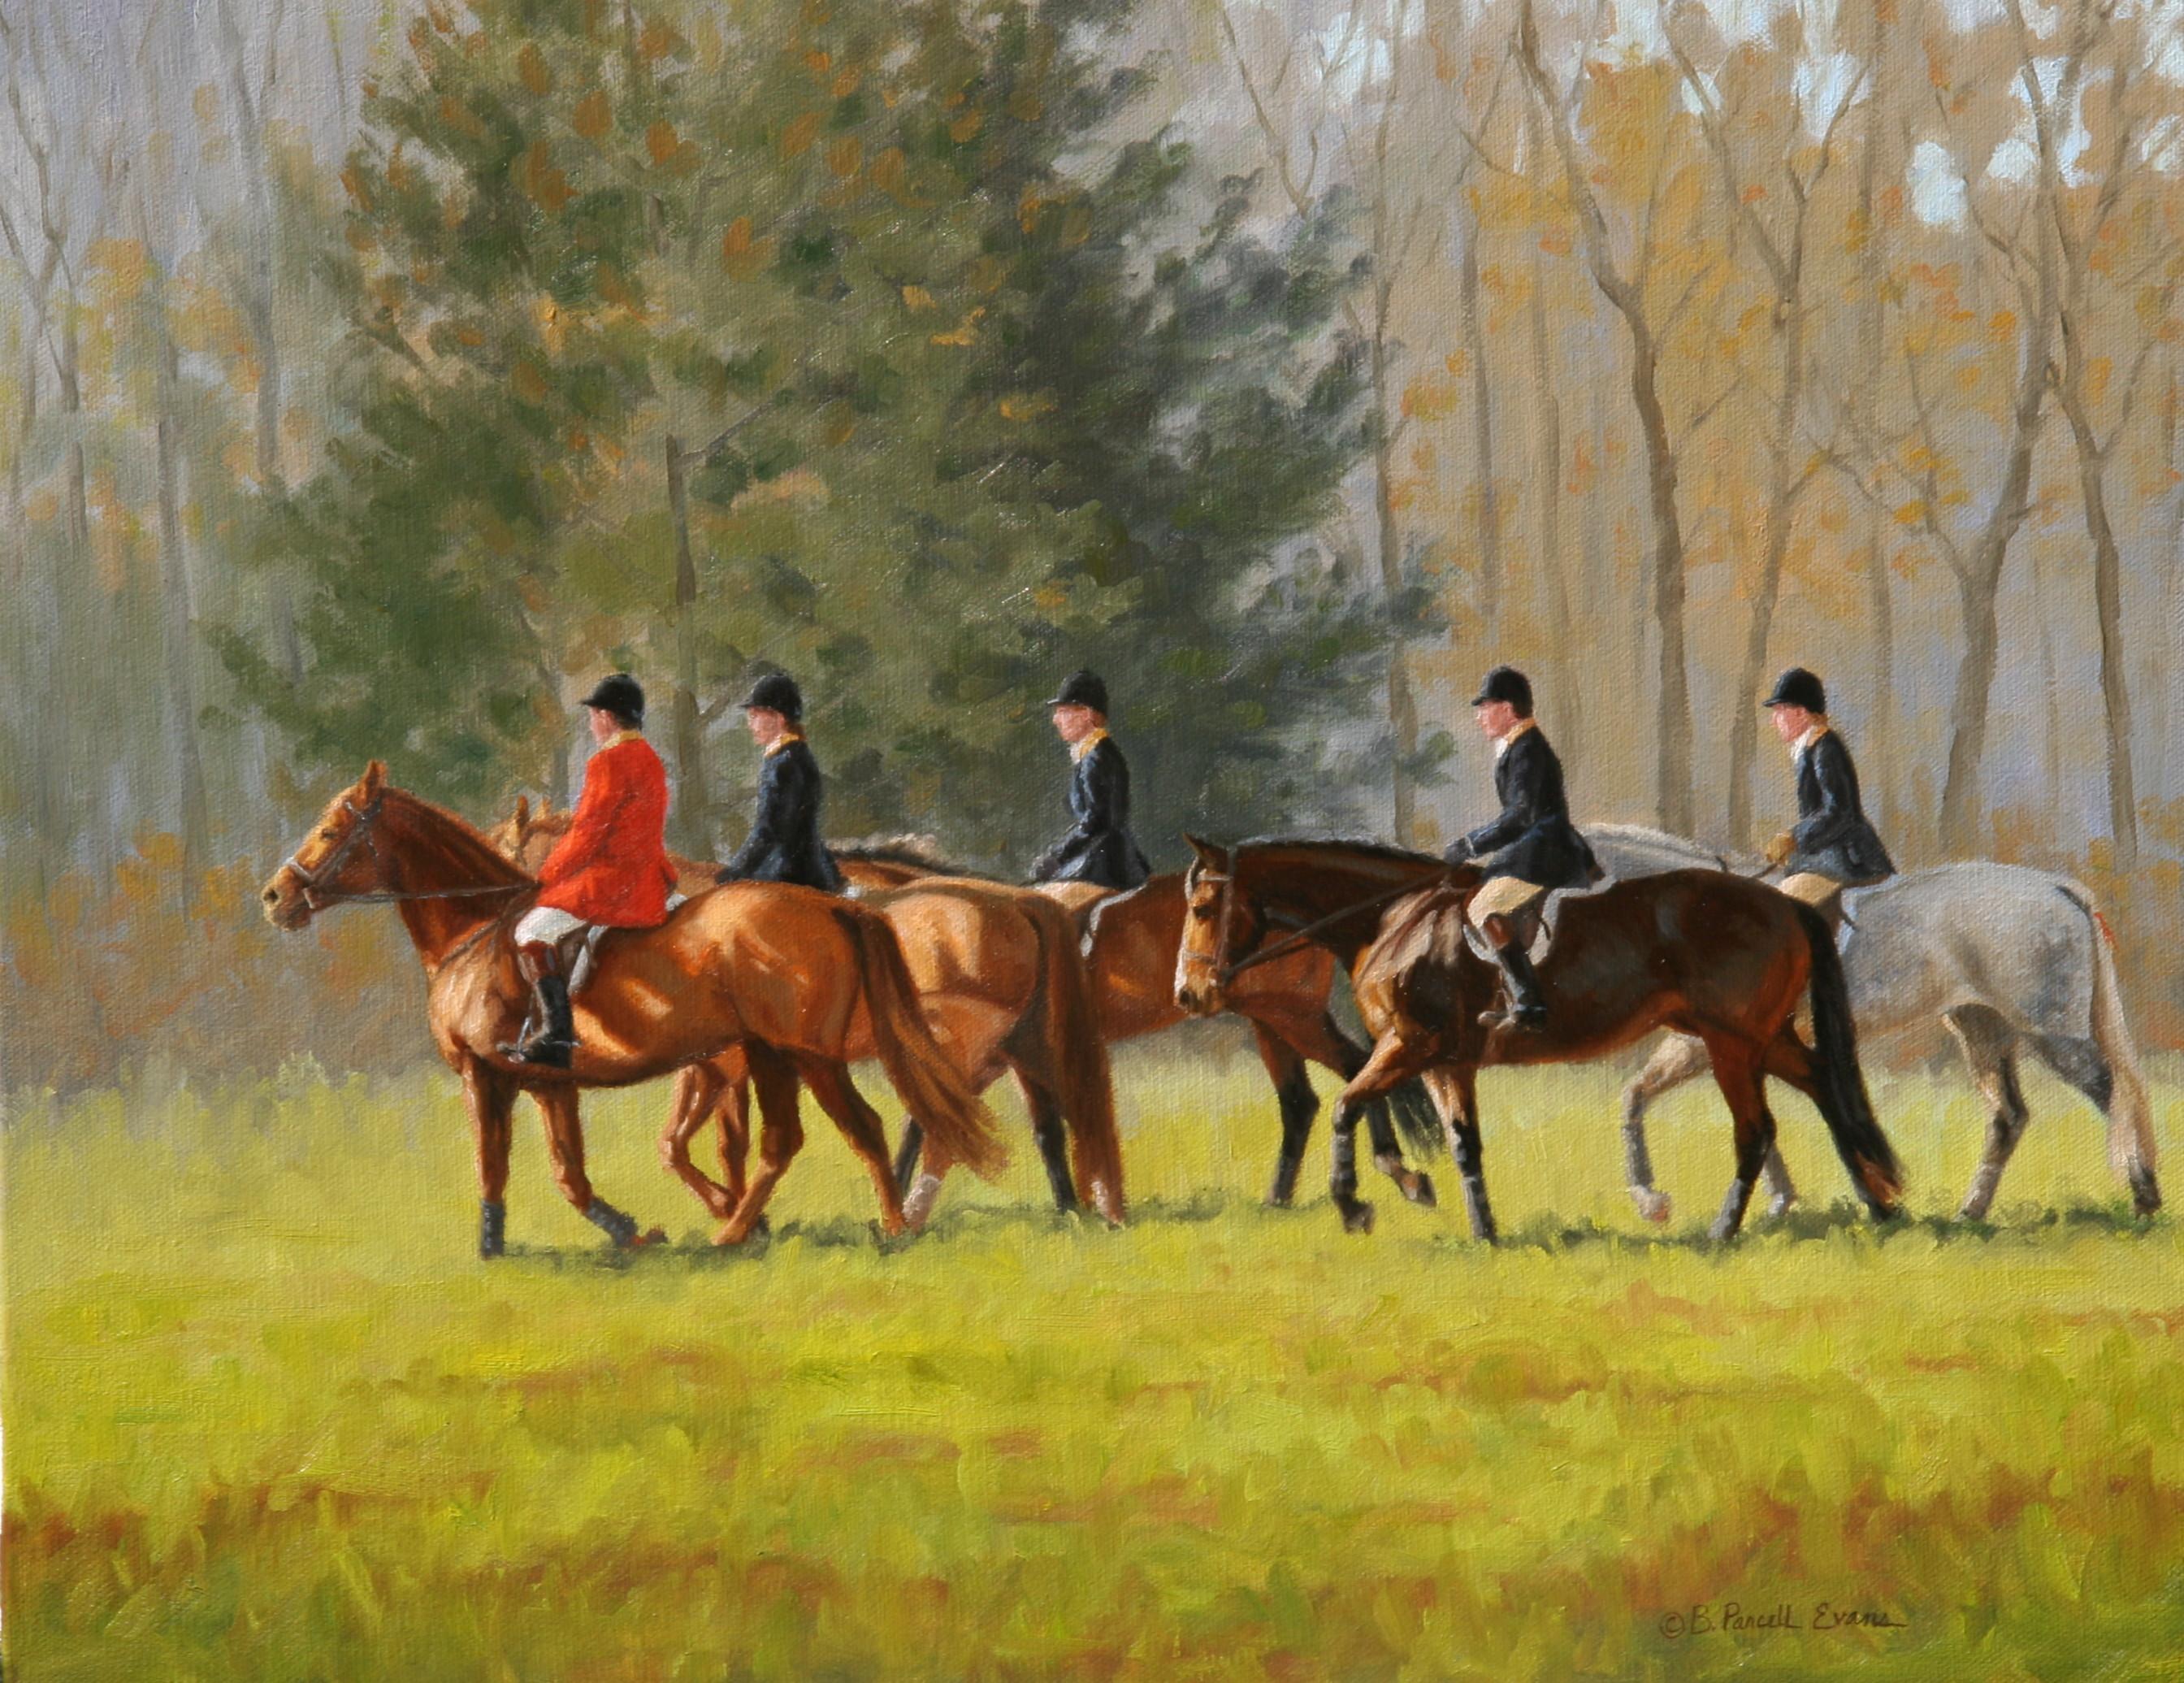 Beth Parcell, "Hacking Home", 16x20 Equine Fox Hunt Landscape Oil Painting